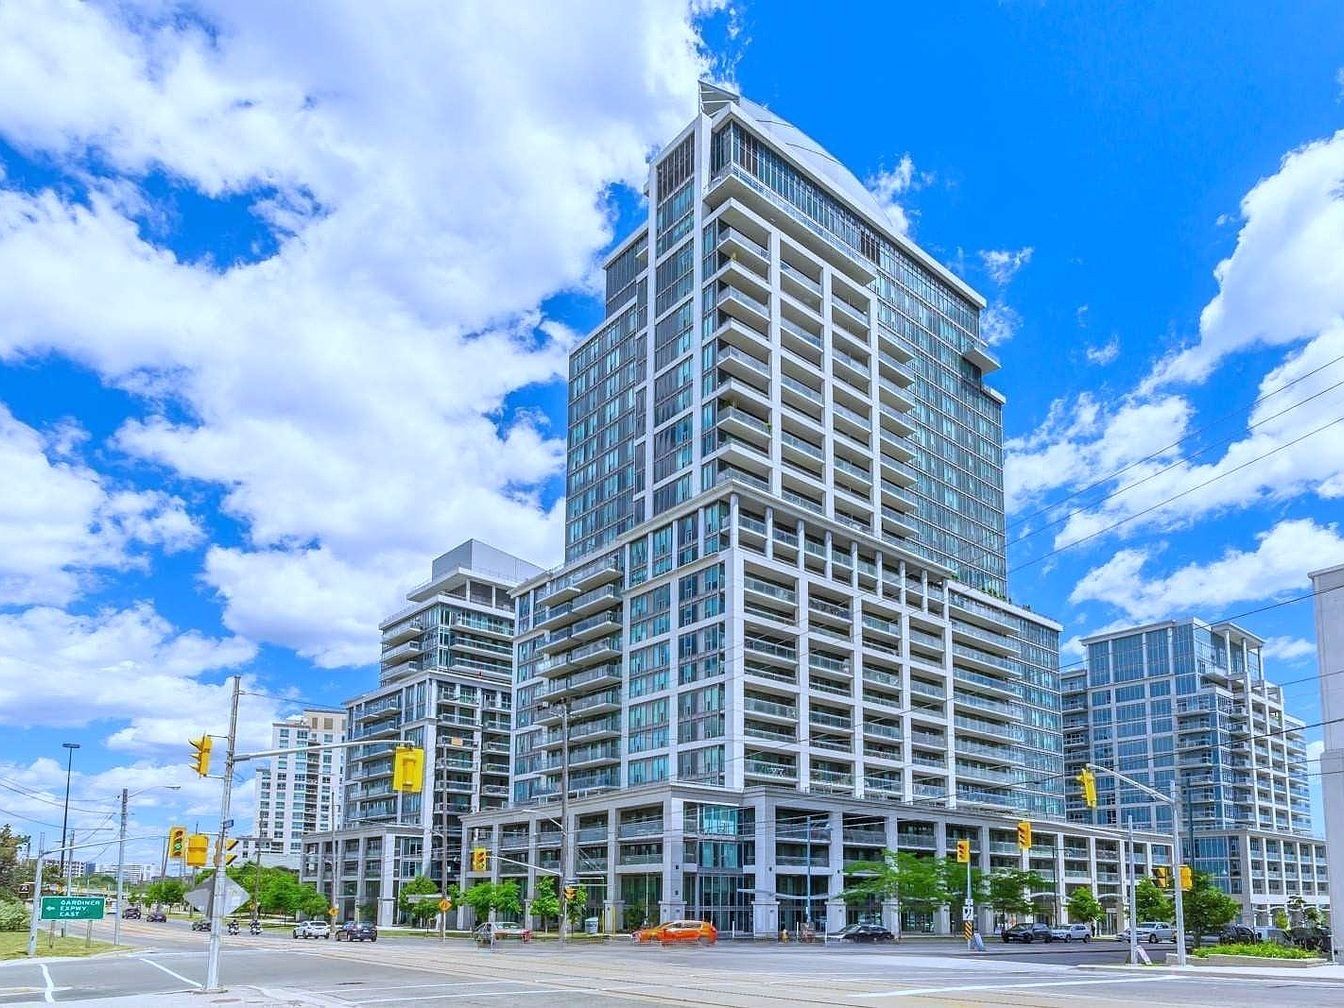 2121 Lake Shore Boulevard W. Voyager I at Waterview Condos is located in  Etobicoke, Toronto - image #1 of 13